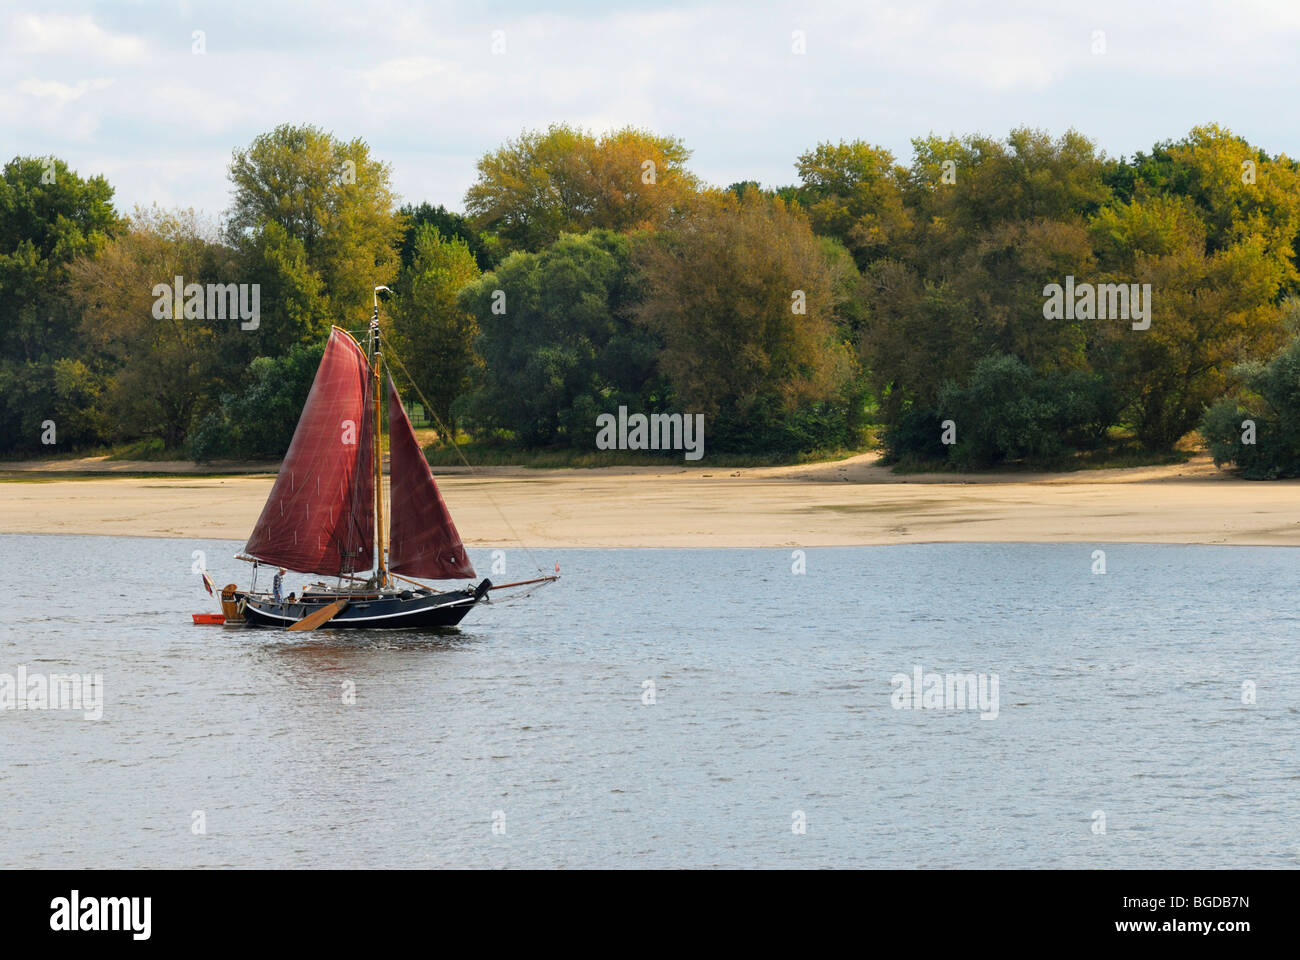 Sailboat on the river Elbe in Altengamme, Hamburg, Germany, Europe Stock Photo